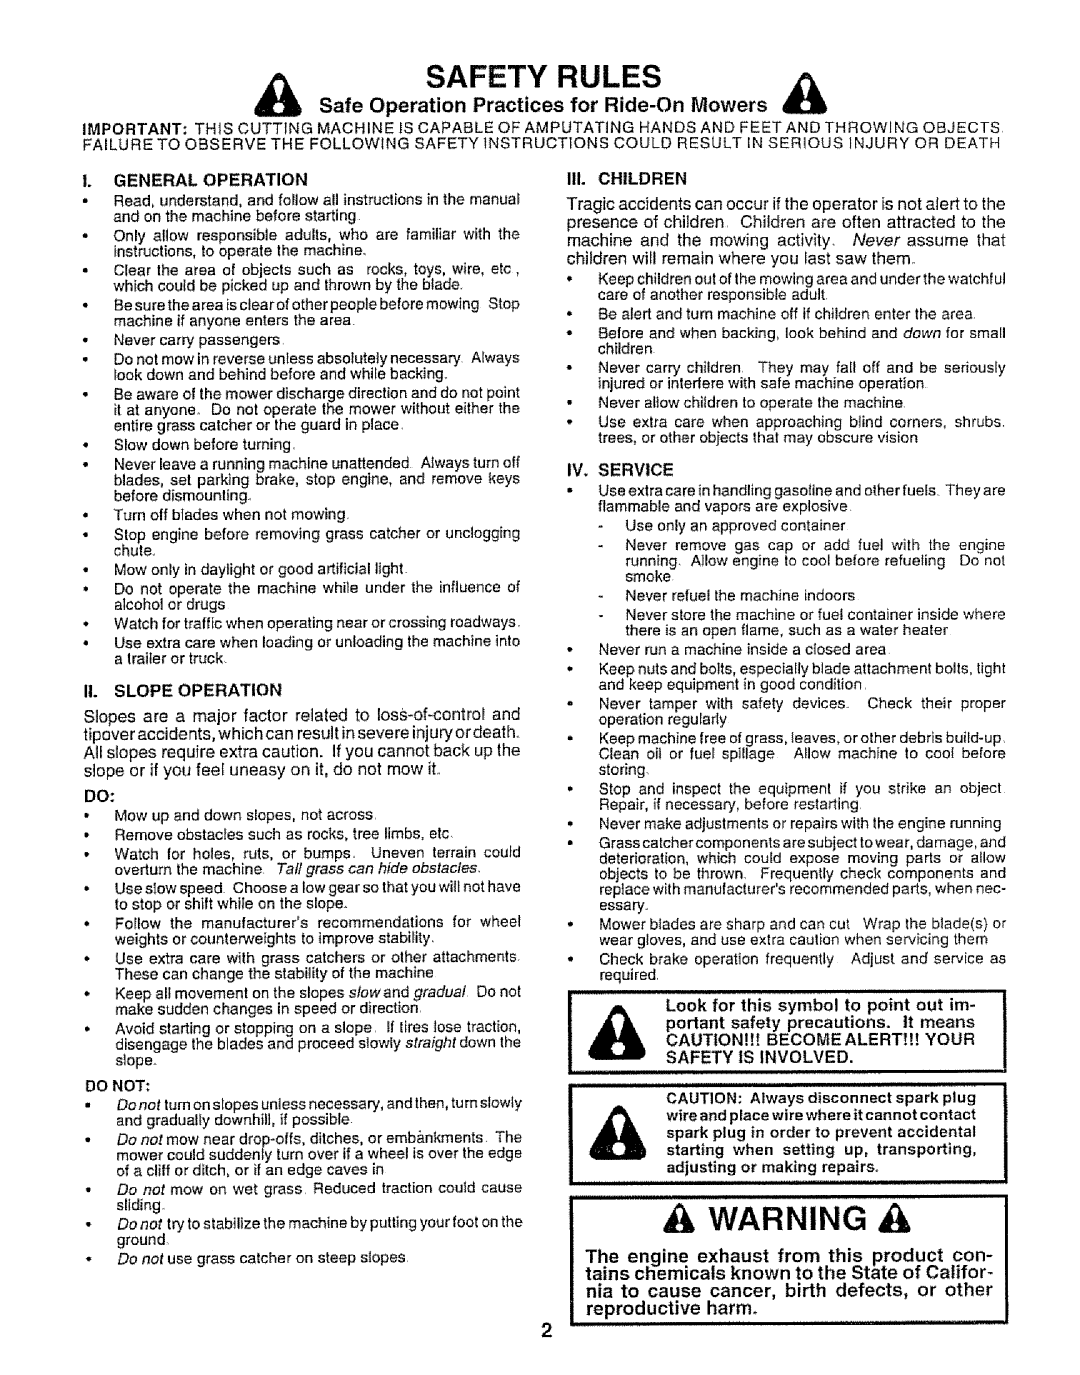 Sears 917.258542 owner manual A Warning A, Safety Rules, Safe Operation Practices for Ride-OnMowers, General Operation 